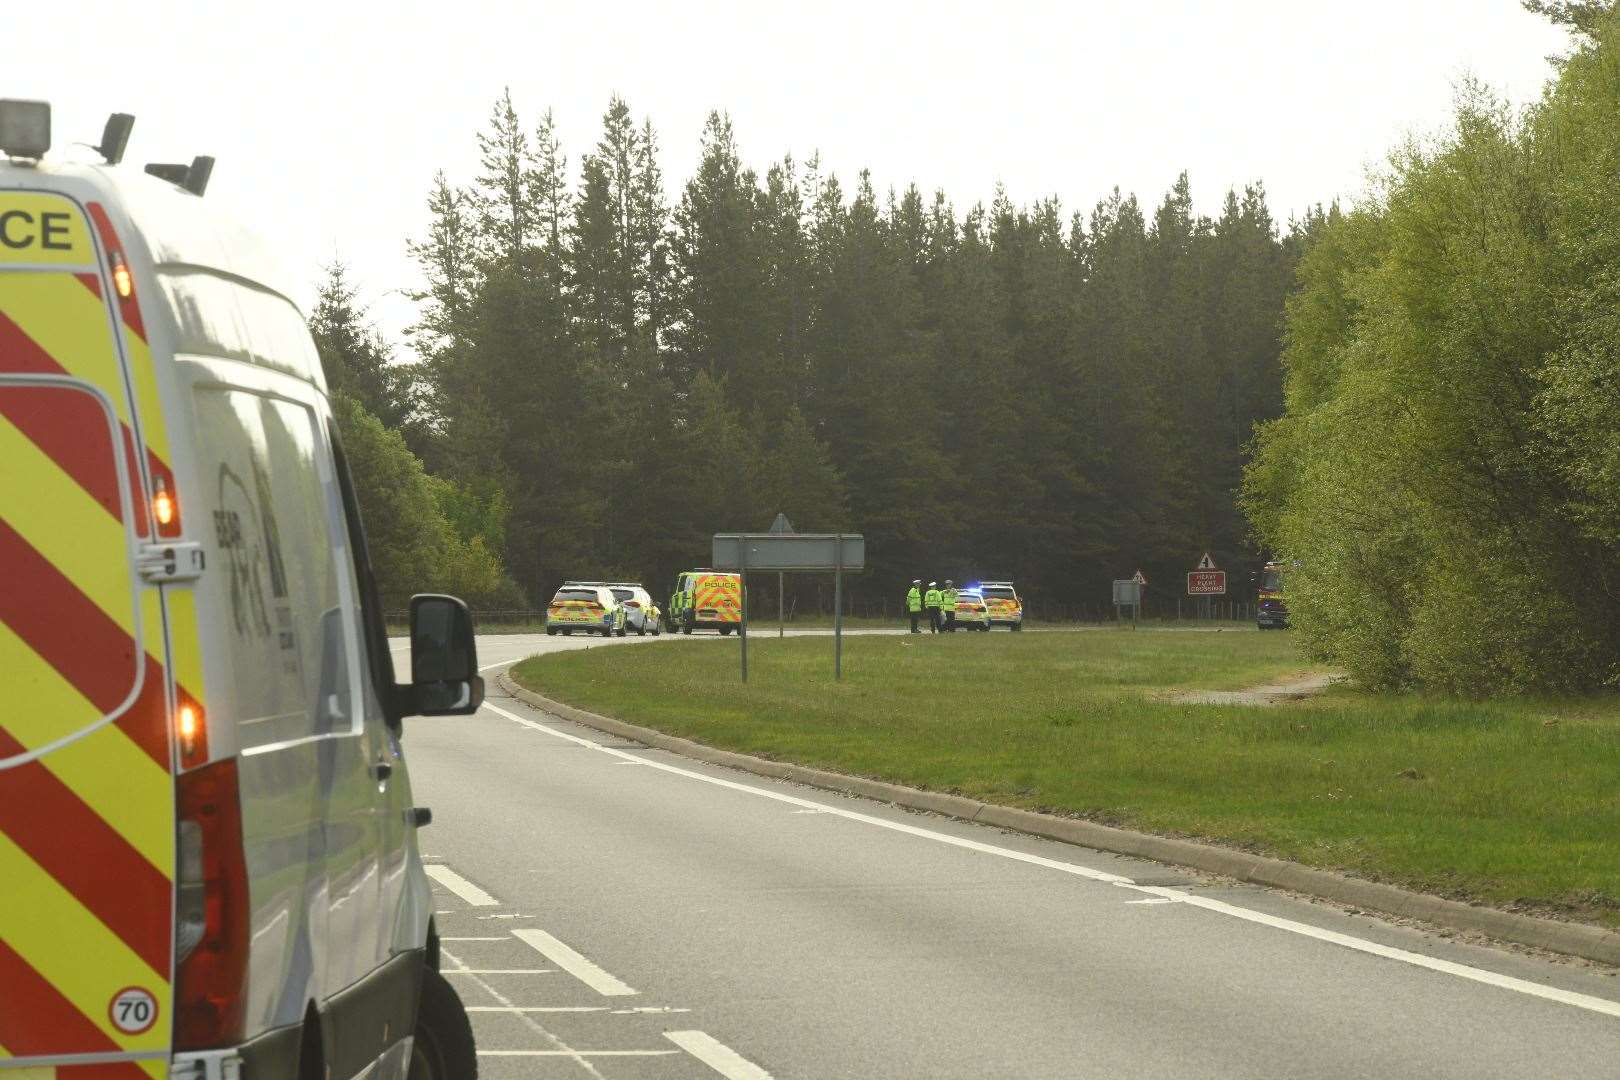 The accident scene, from afar, on the A9 south of Inverness